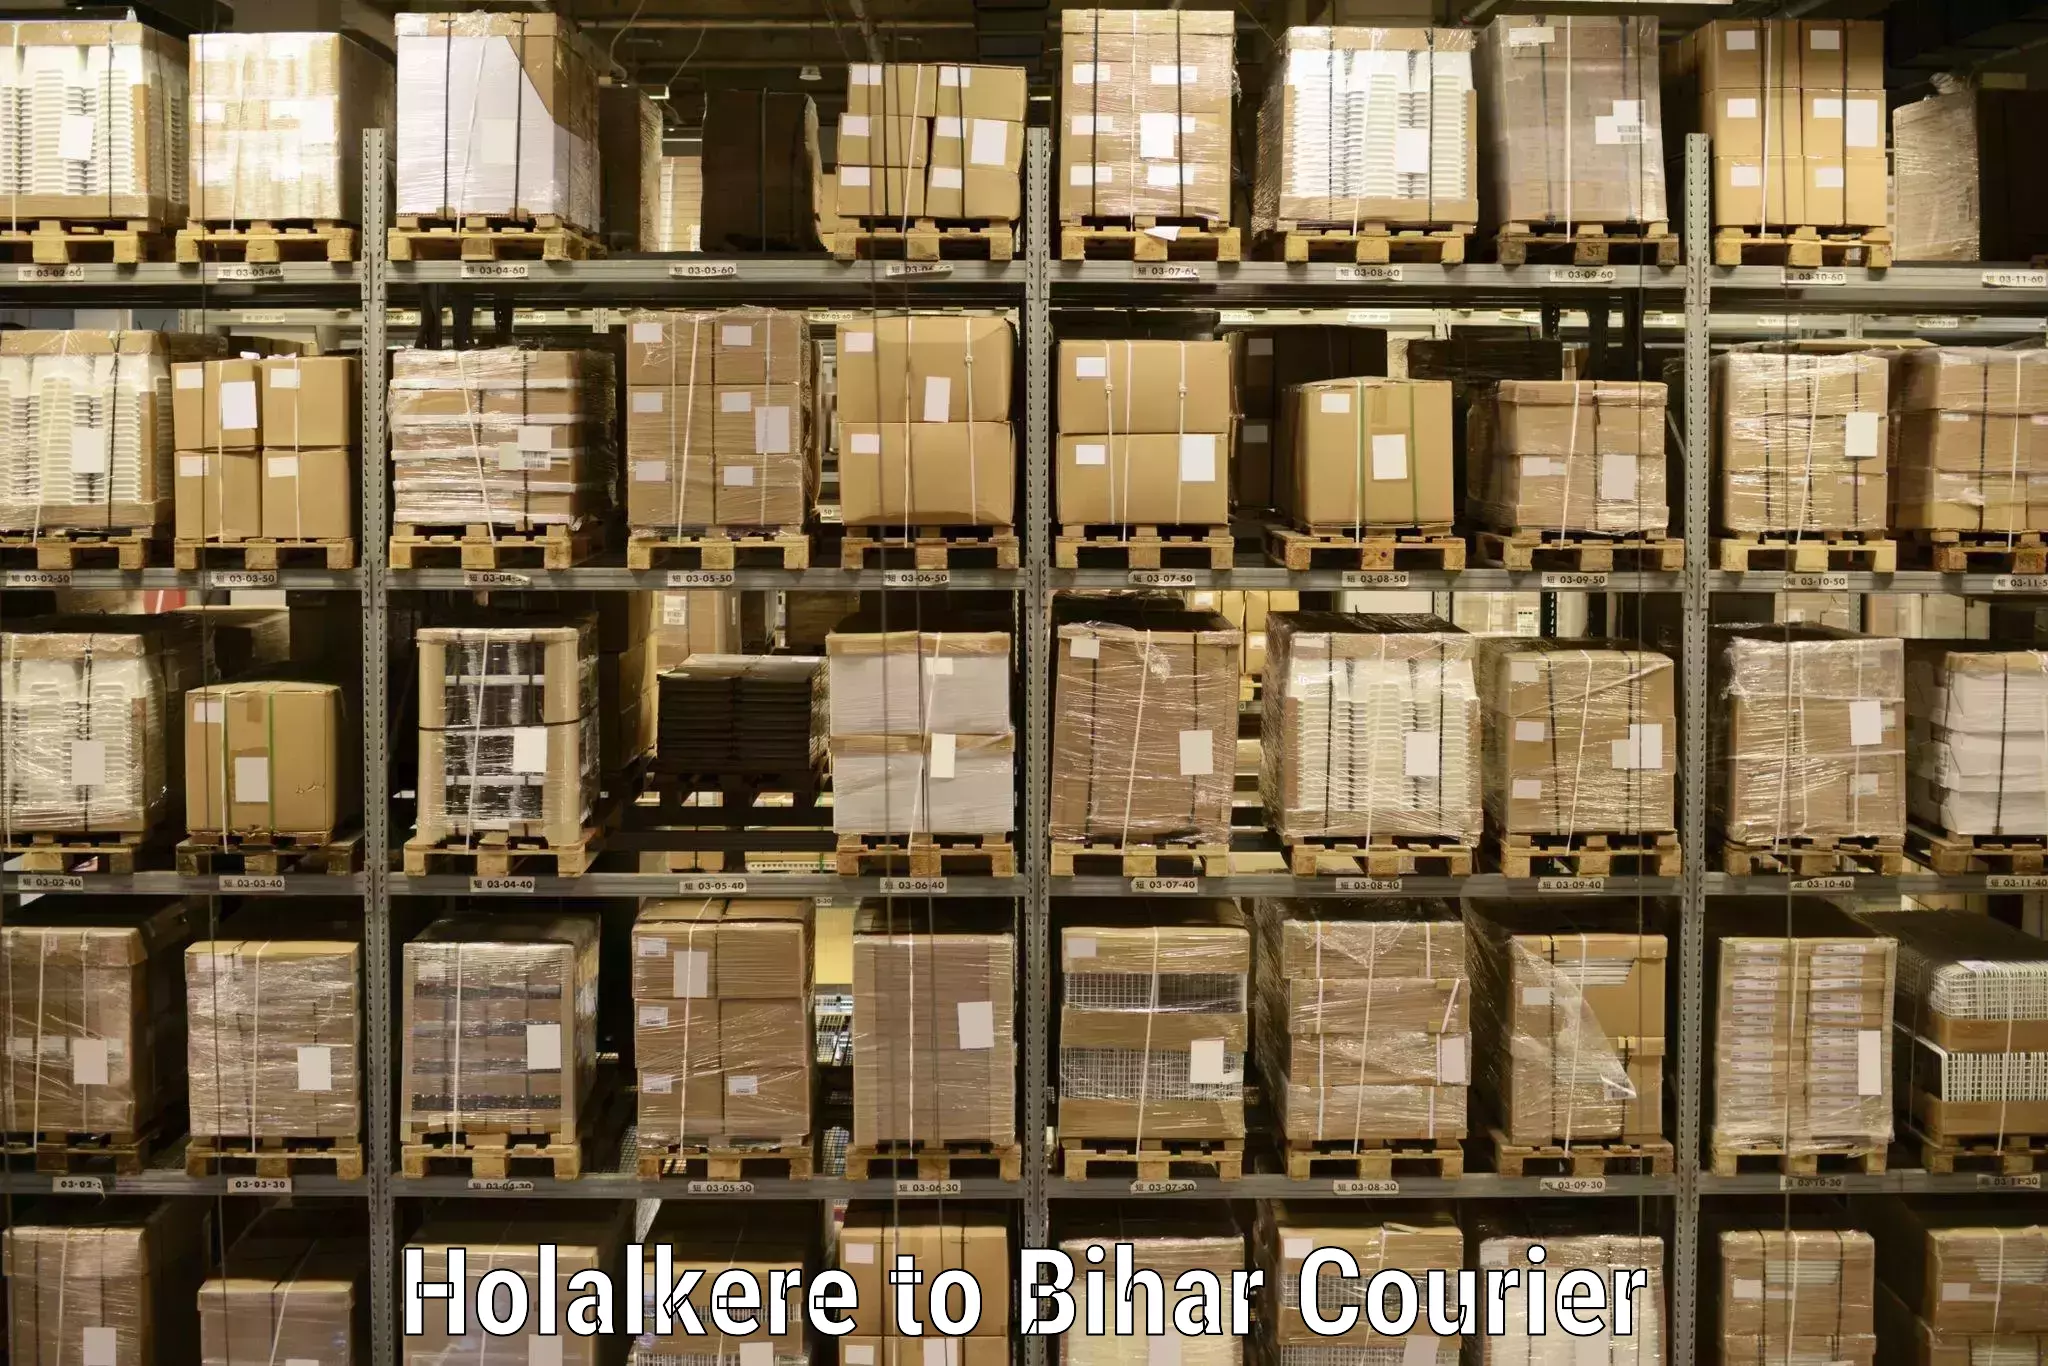 Courier service comparison in Holalkere to Barhiya